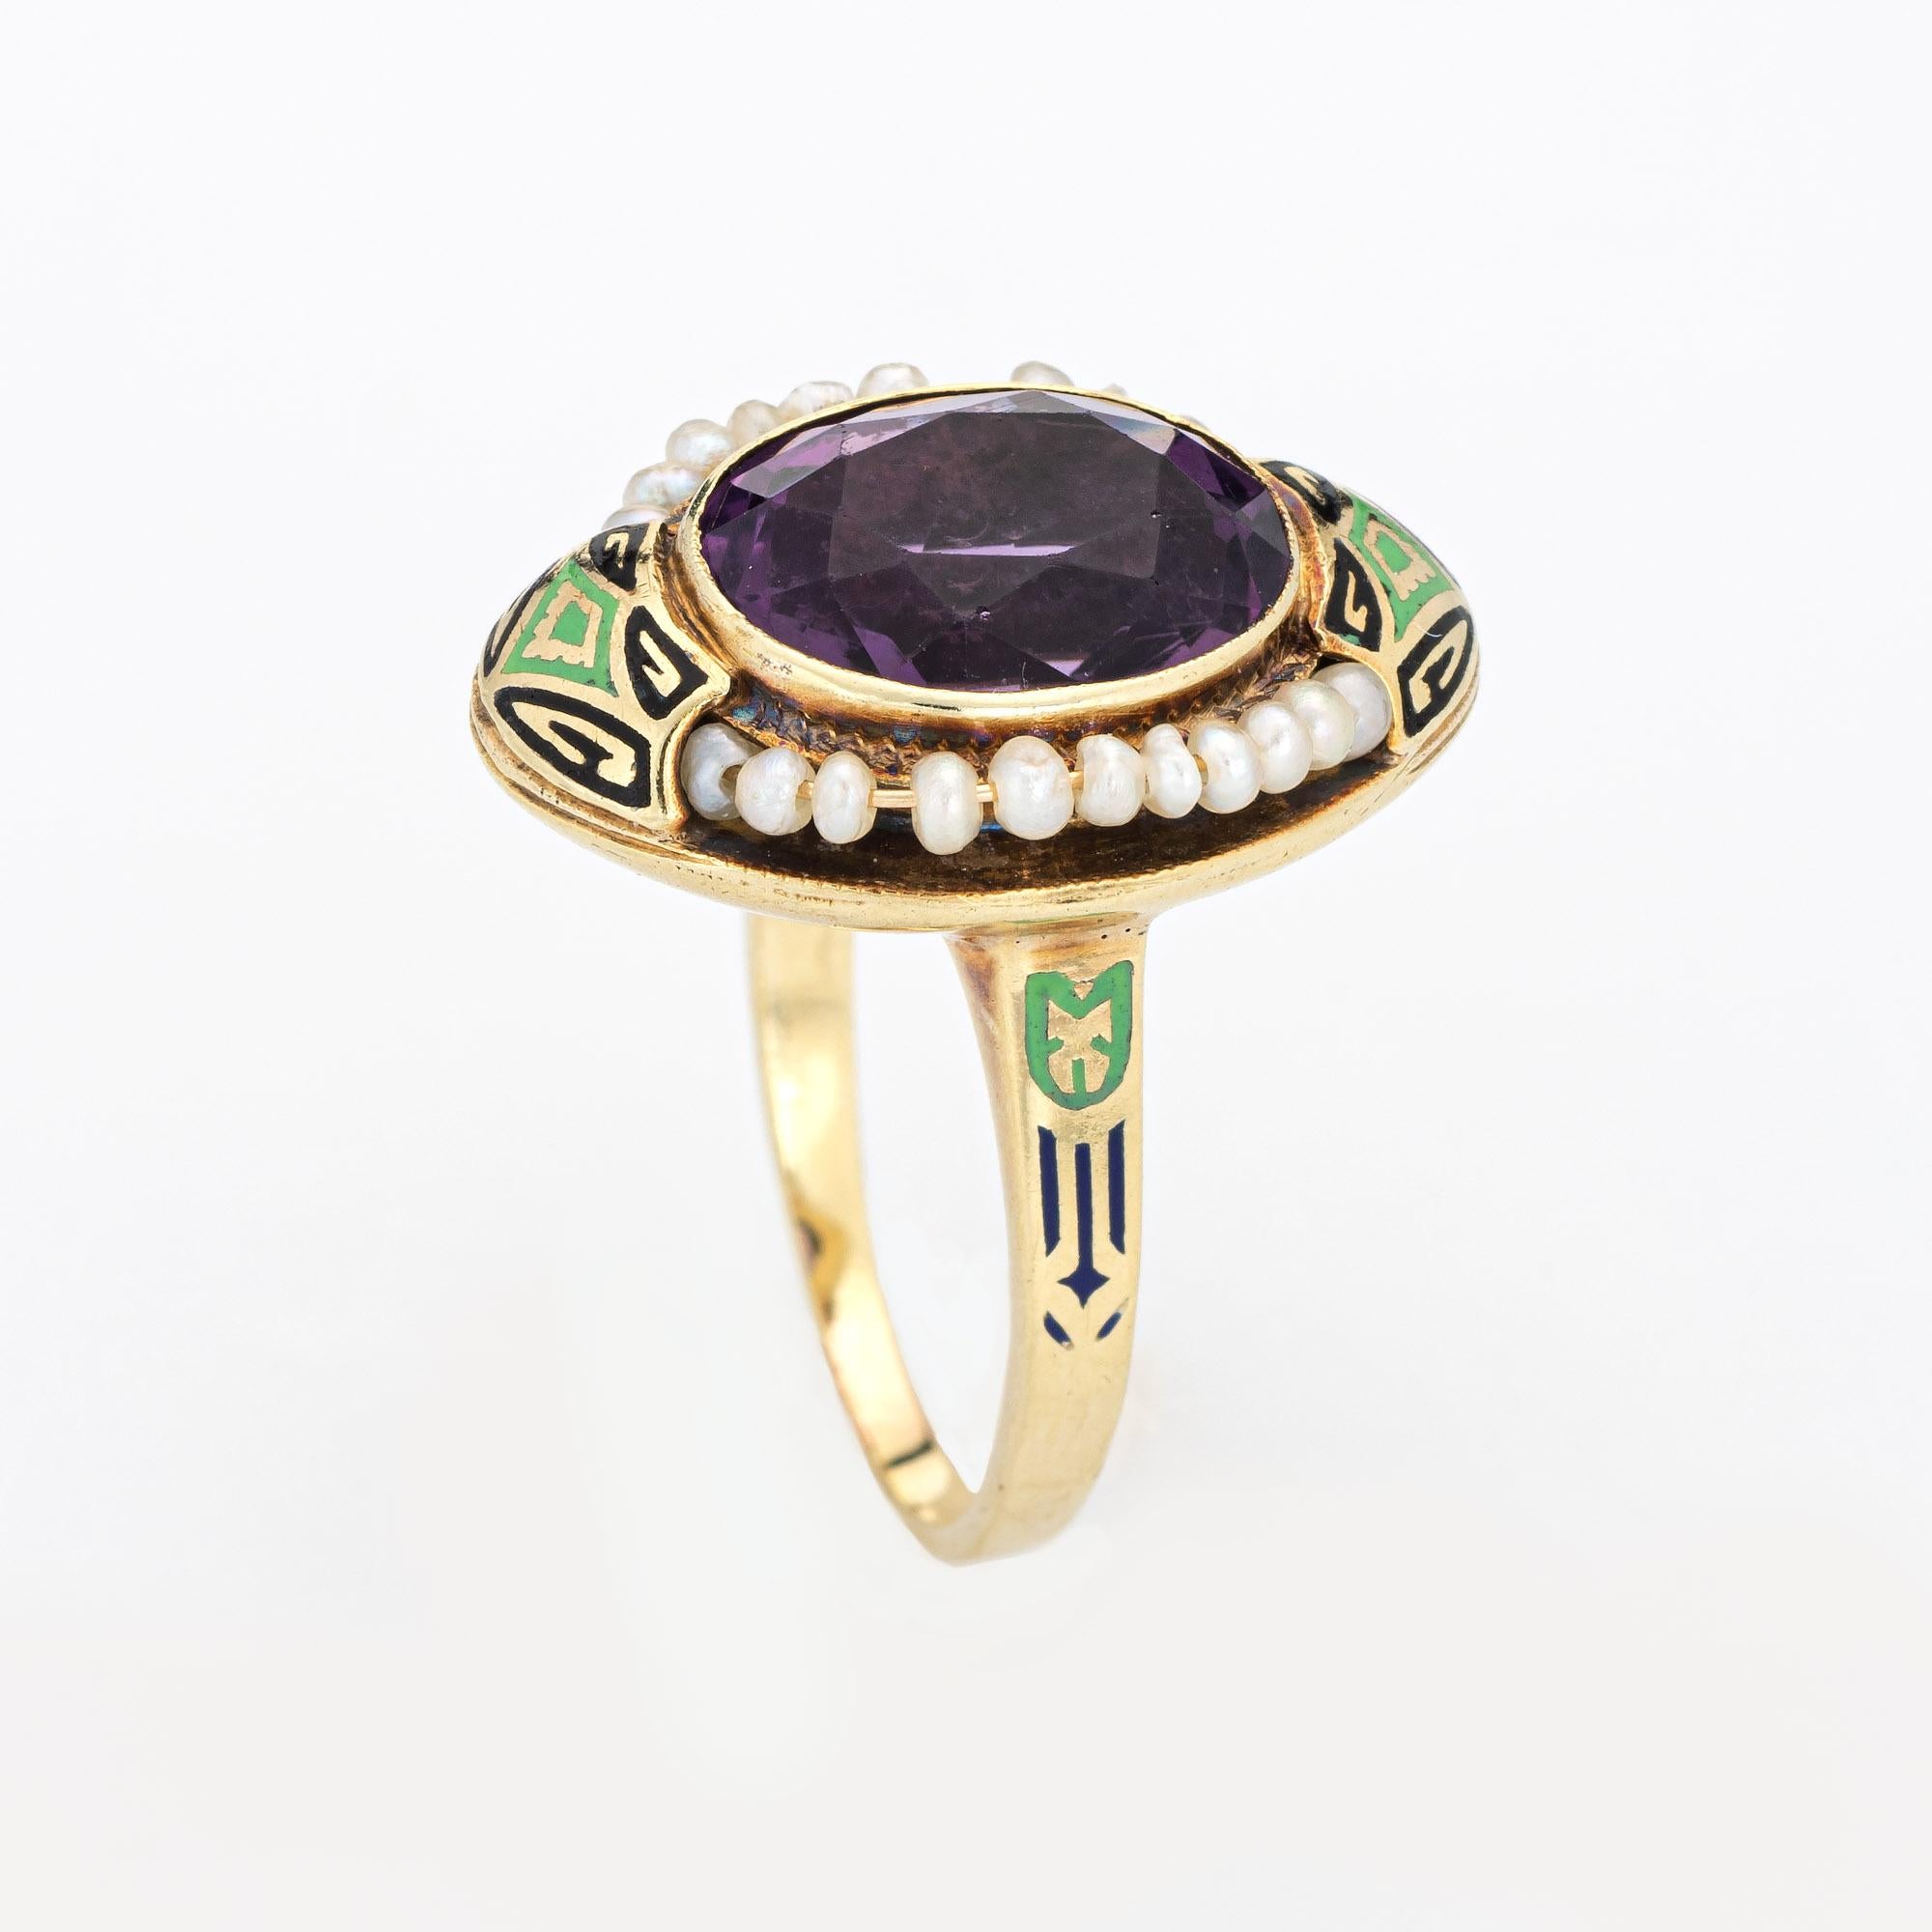 Finely detailed vintage Art Deco amethyst ring (circa 1920s to 1930s) crafted in 14k yellow gold & platinum. 

Oval cut faceted amethyst measures 10mm x 11mm (estimated at 4 carats). The amethyst is in very good condition and free of cracks or